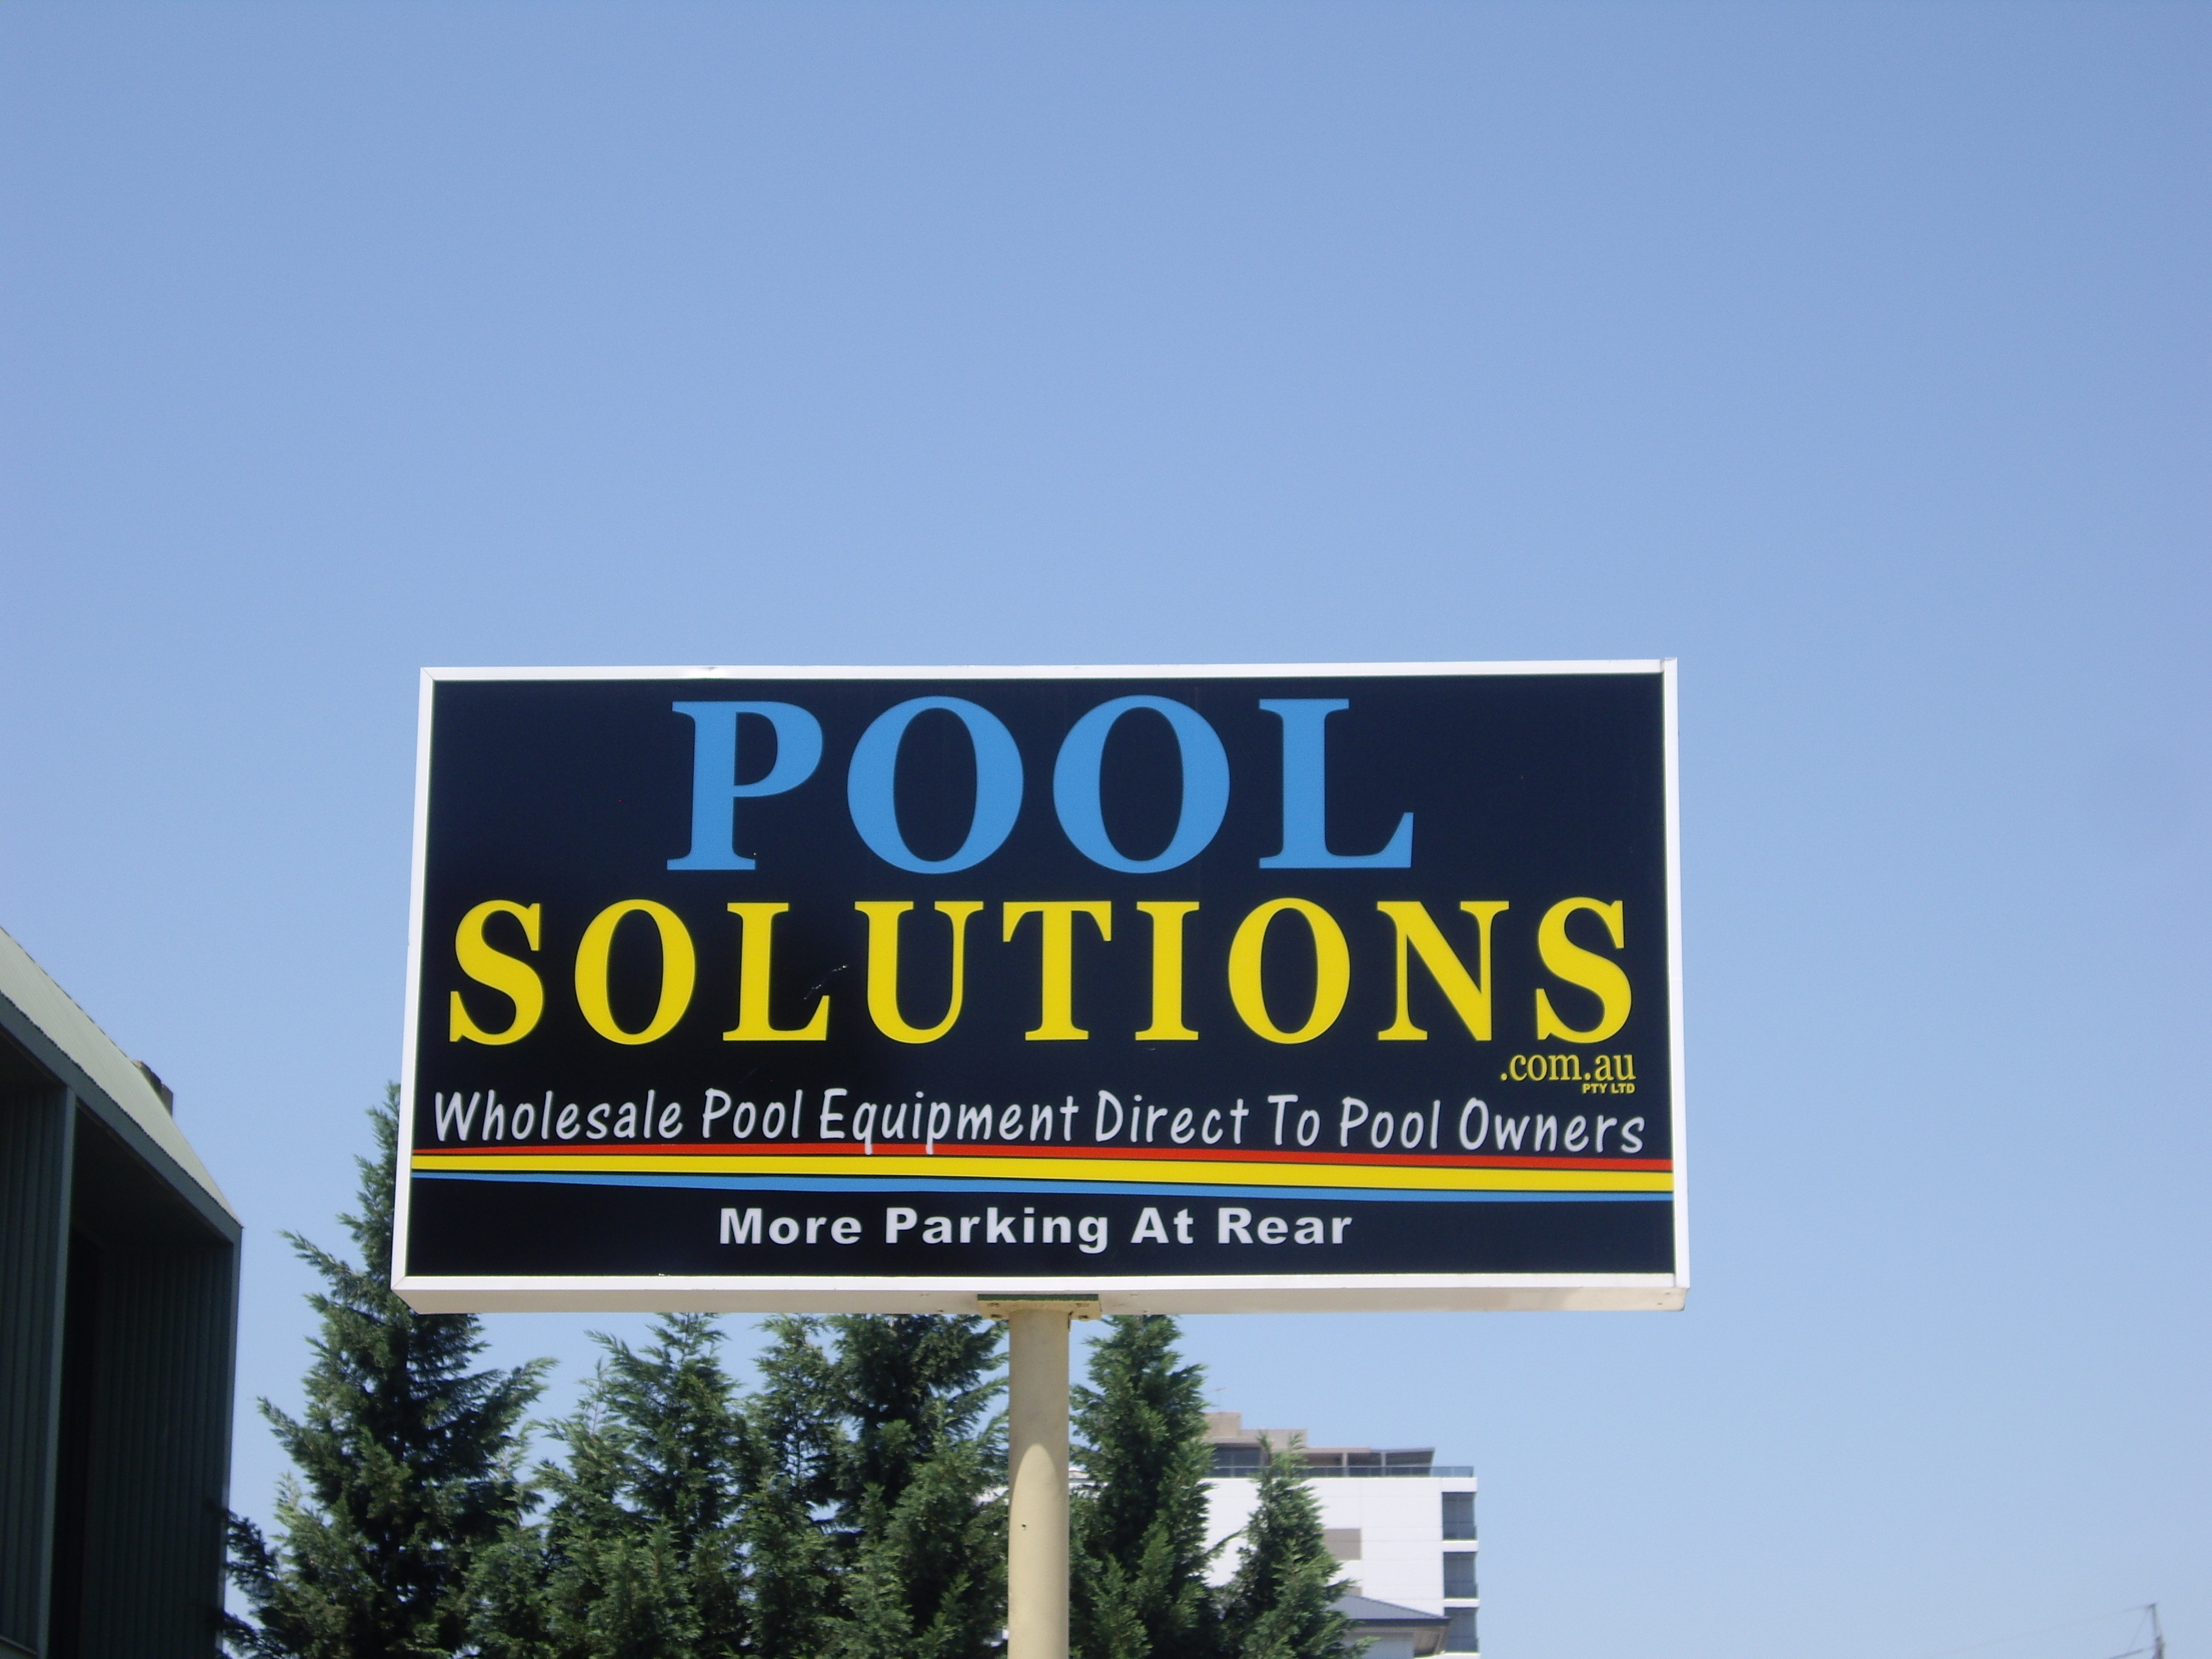 Pool Solutions Light Boxes